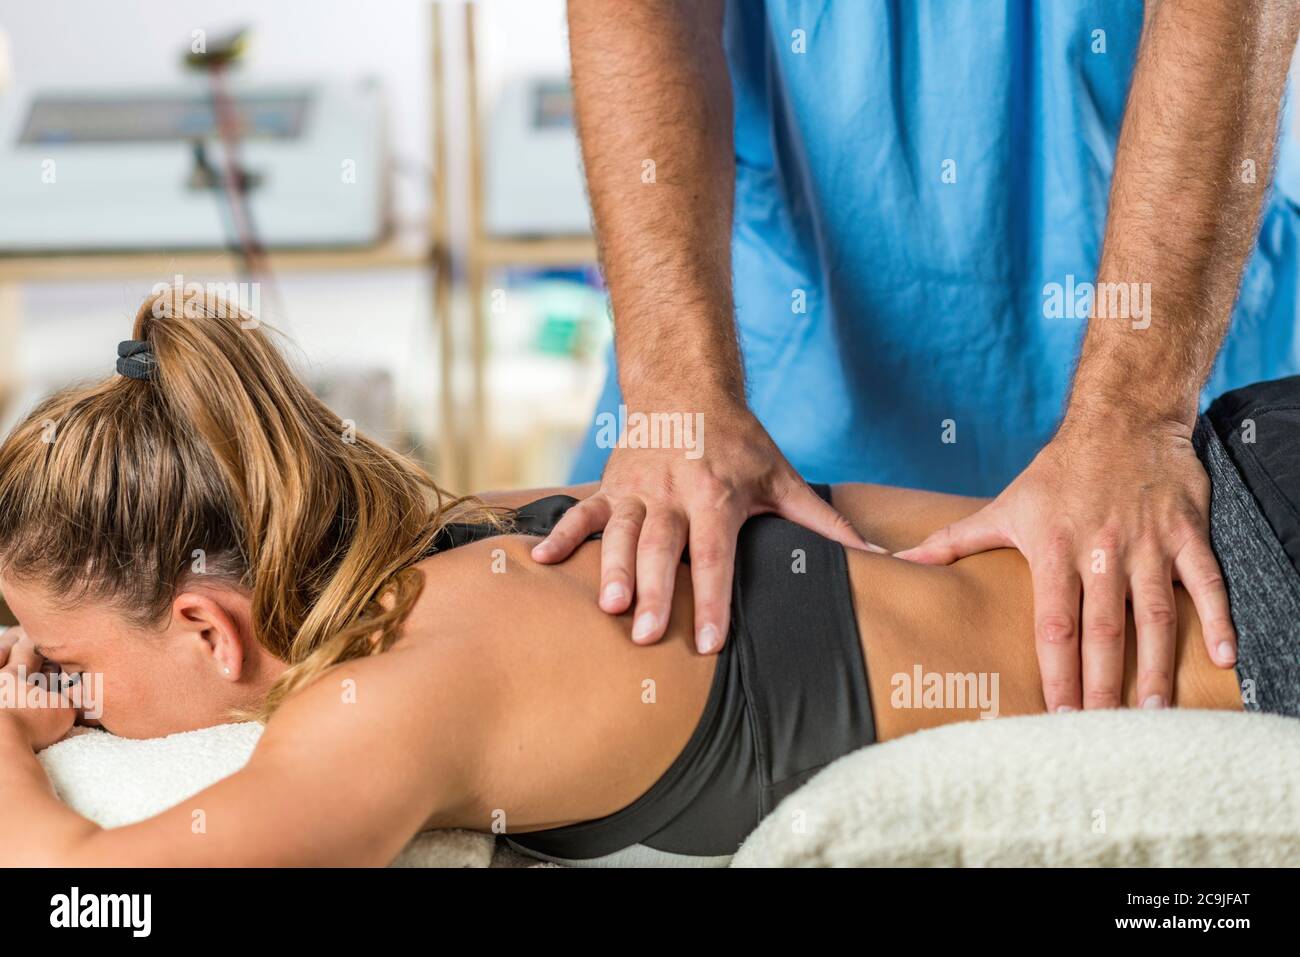 Physical therapy. Therapist applying strong pressure onto lower back muscles. Stock Photo